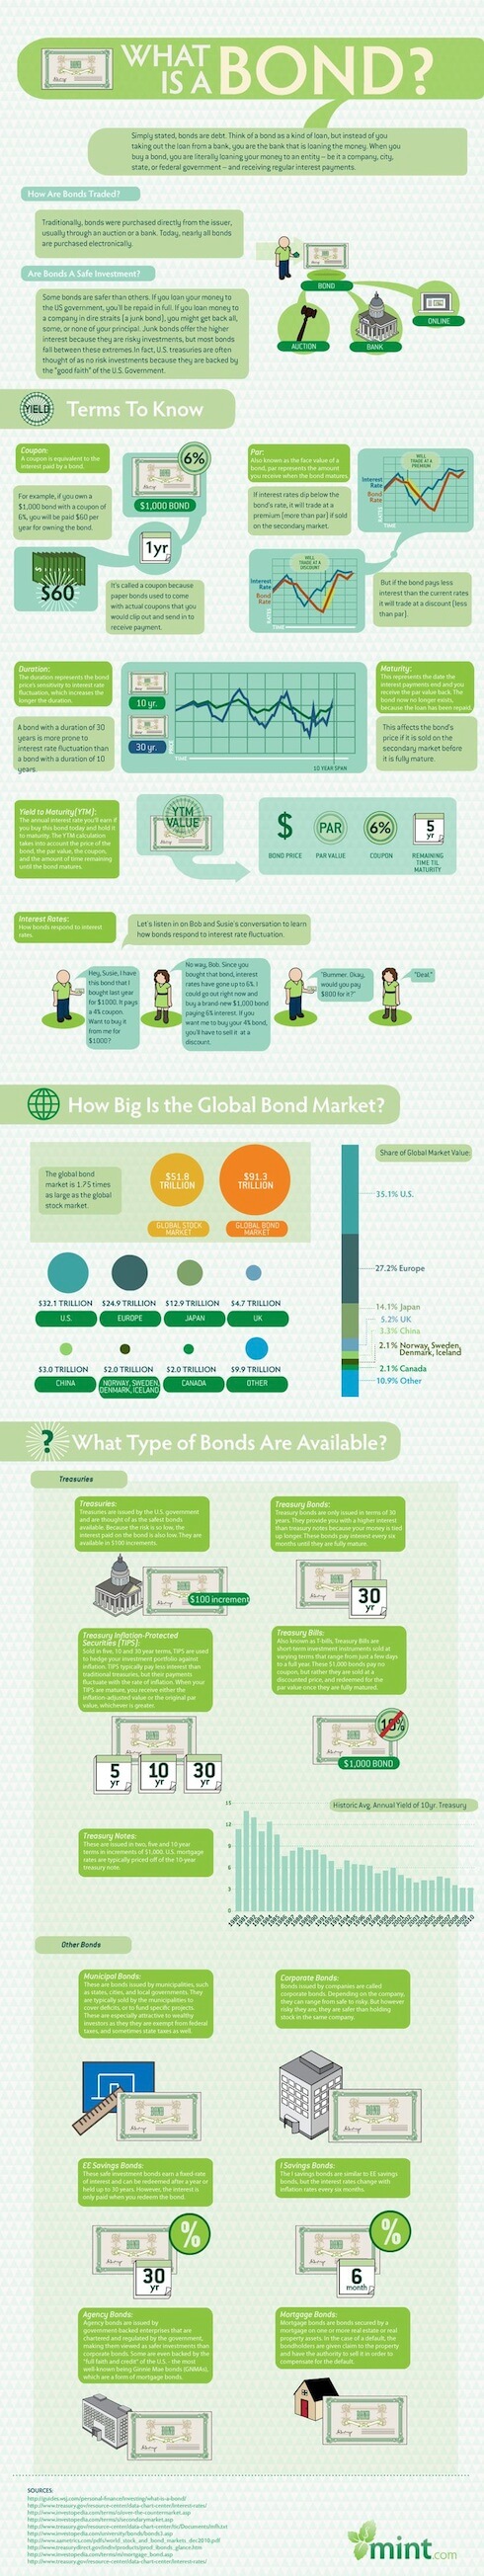 What Are Bonds?